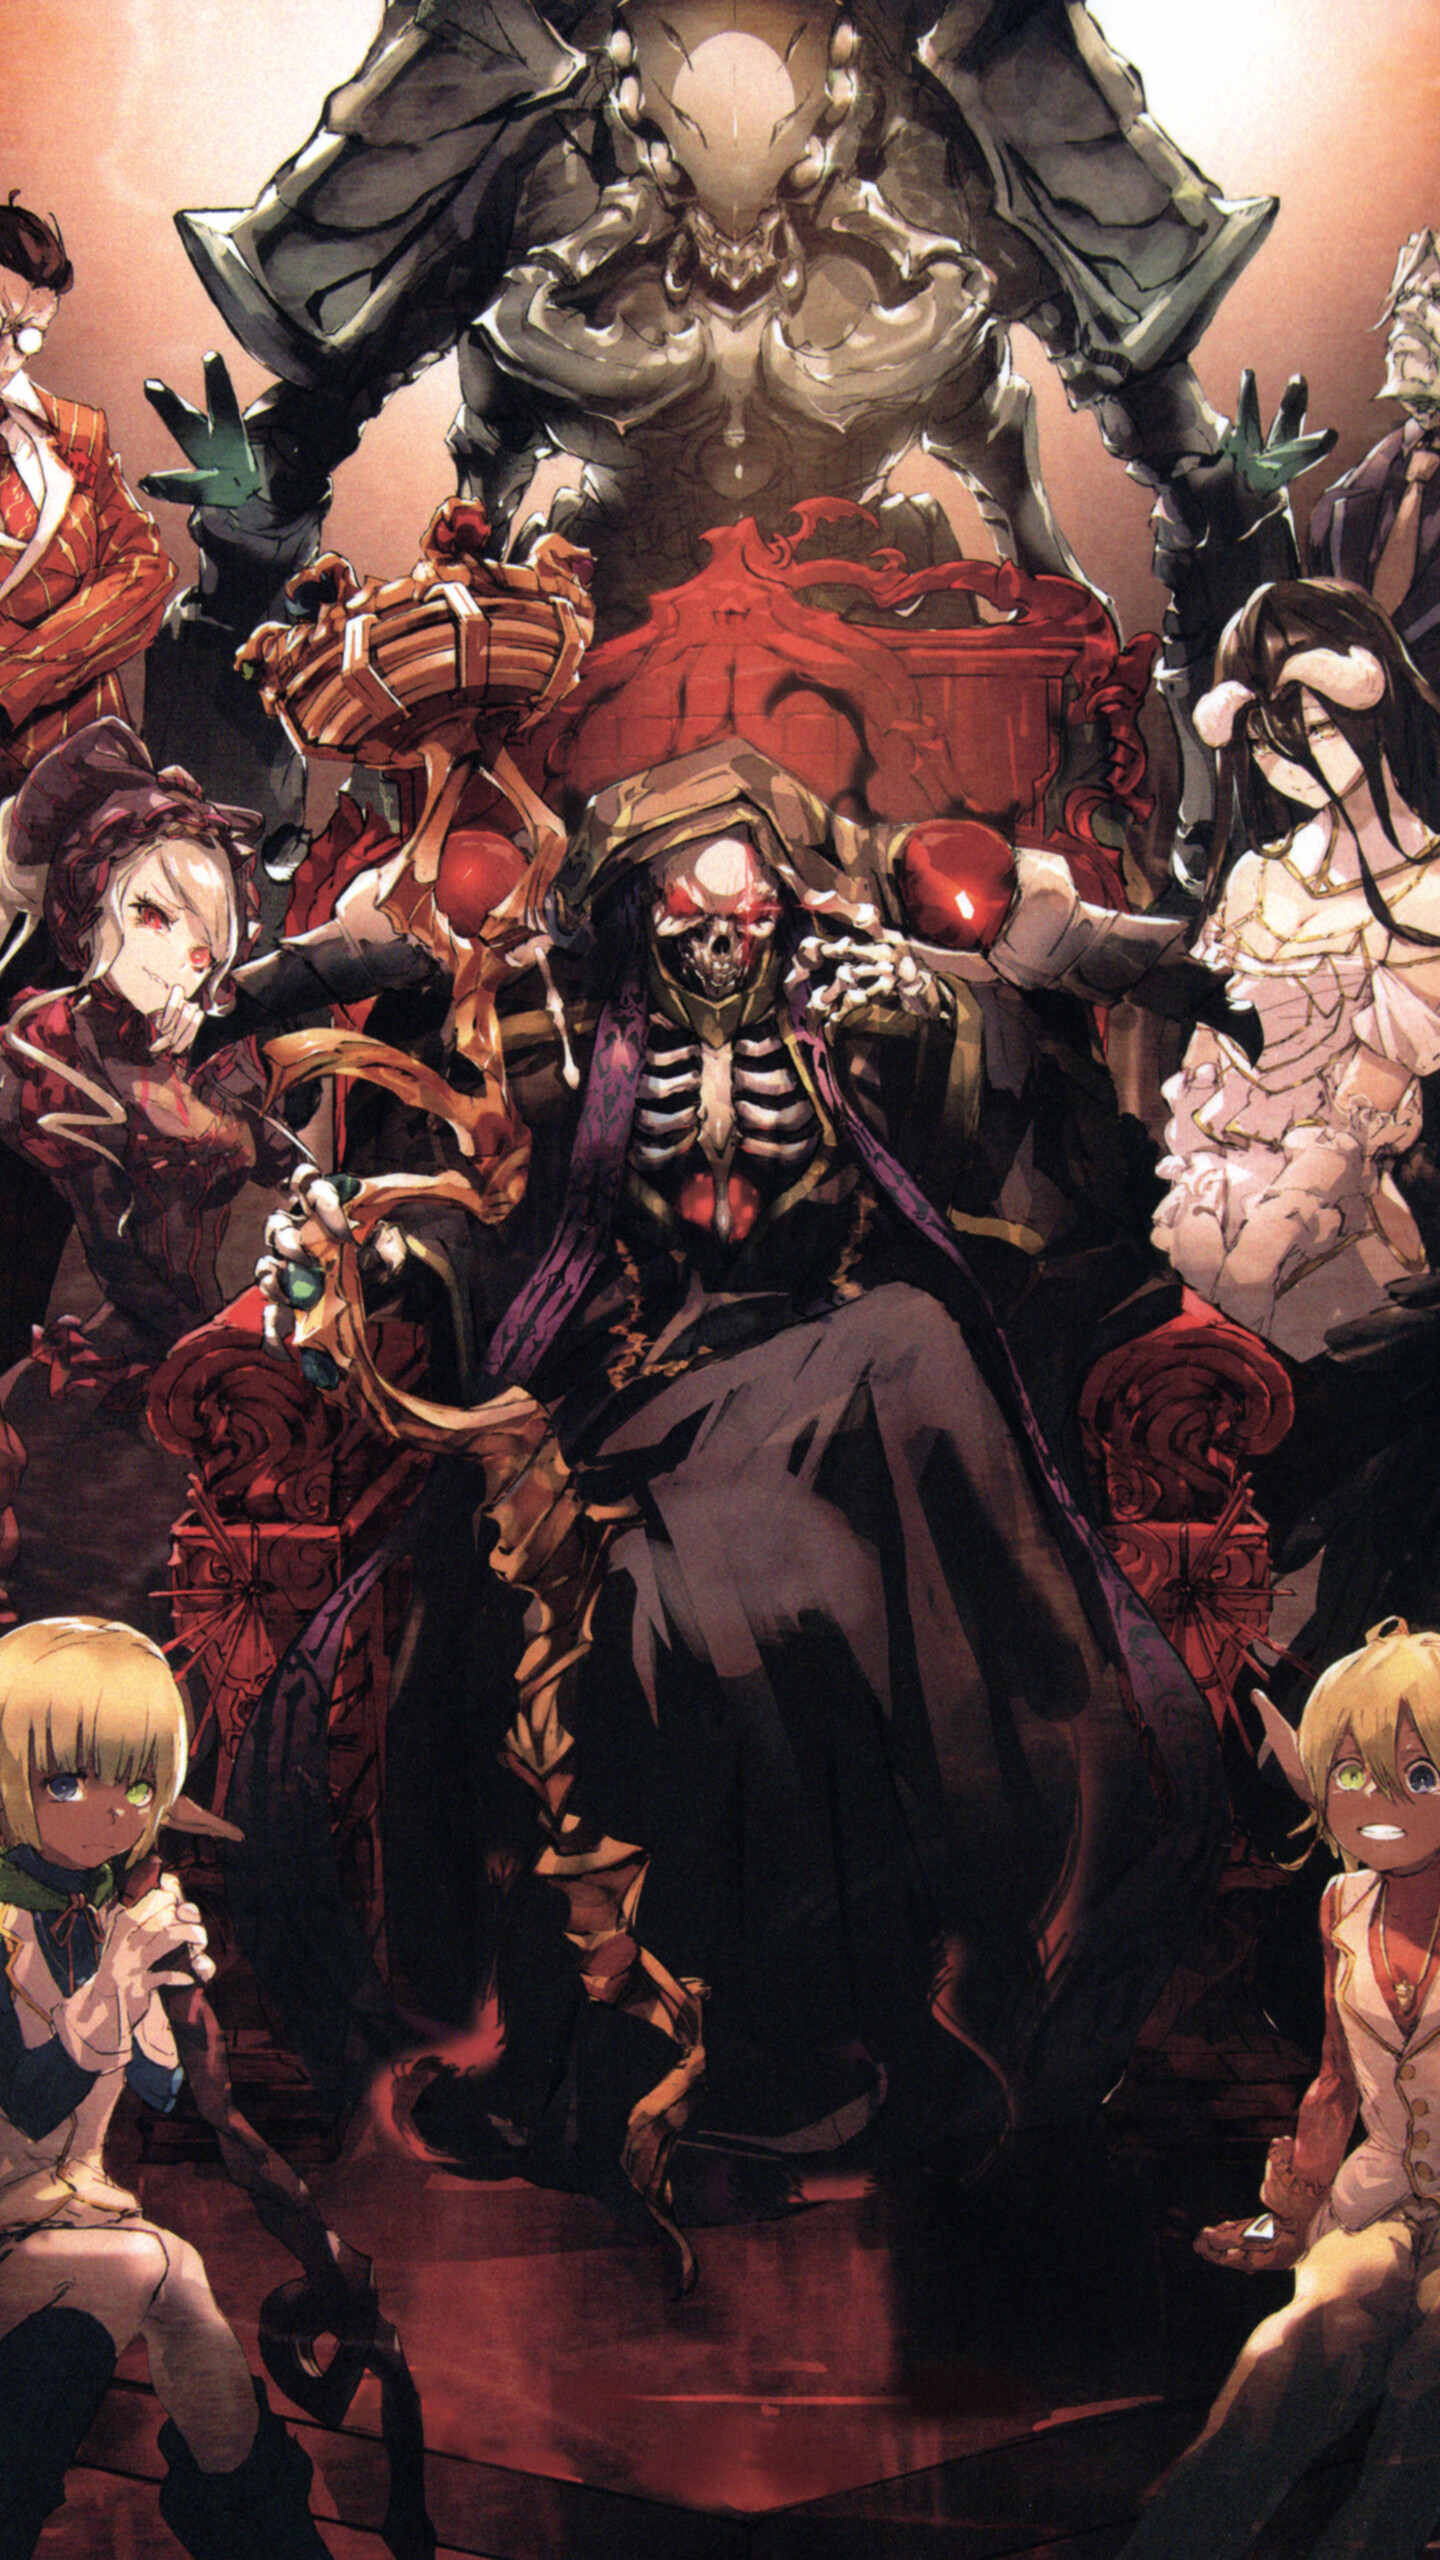 Overlord: Two compilation films acting as a recap to the anime television series were released in 2017. 1440x2560 HD Background.